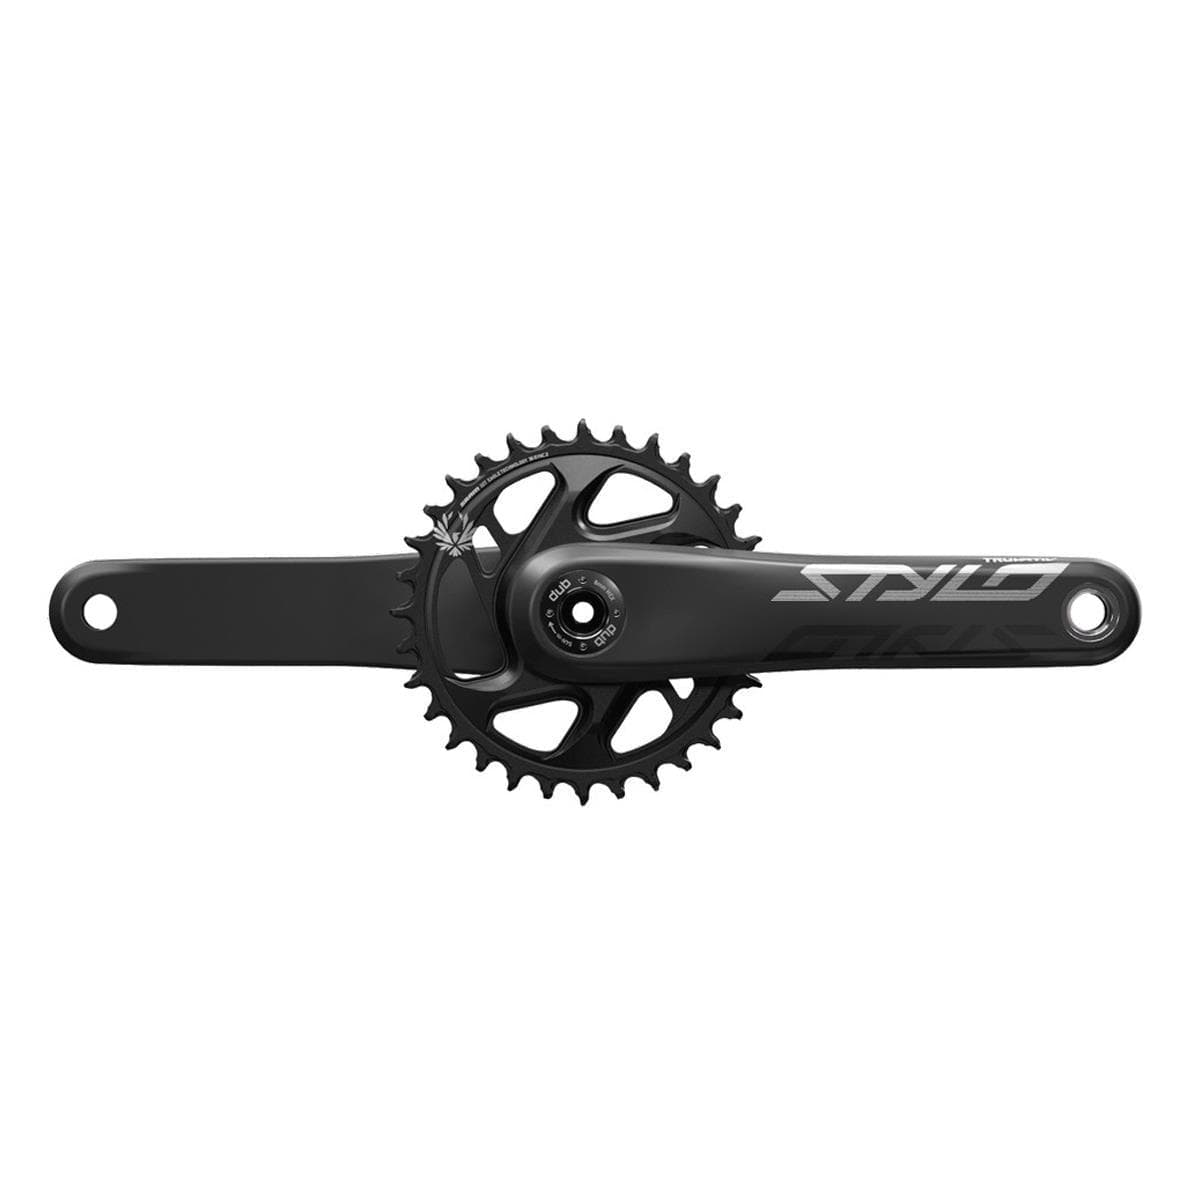 Truvativ Crank Stylo Carbon Eagle Boost 148 Dub 12S 175 W Direct Mount 32T X-Sync 2 Chainring Black (Dub Cups/Bearings Not Included): Black 175Mm